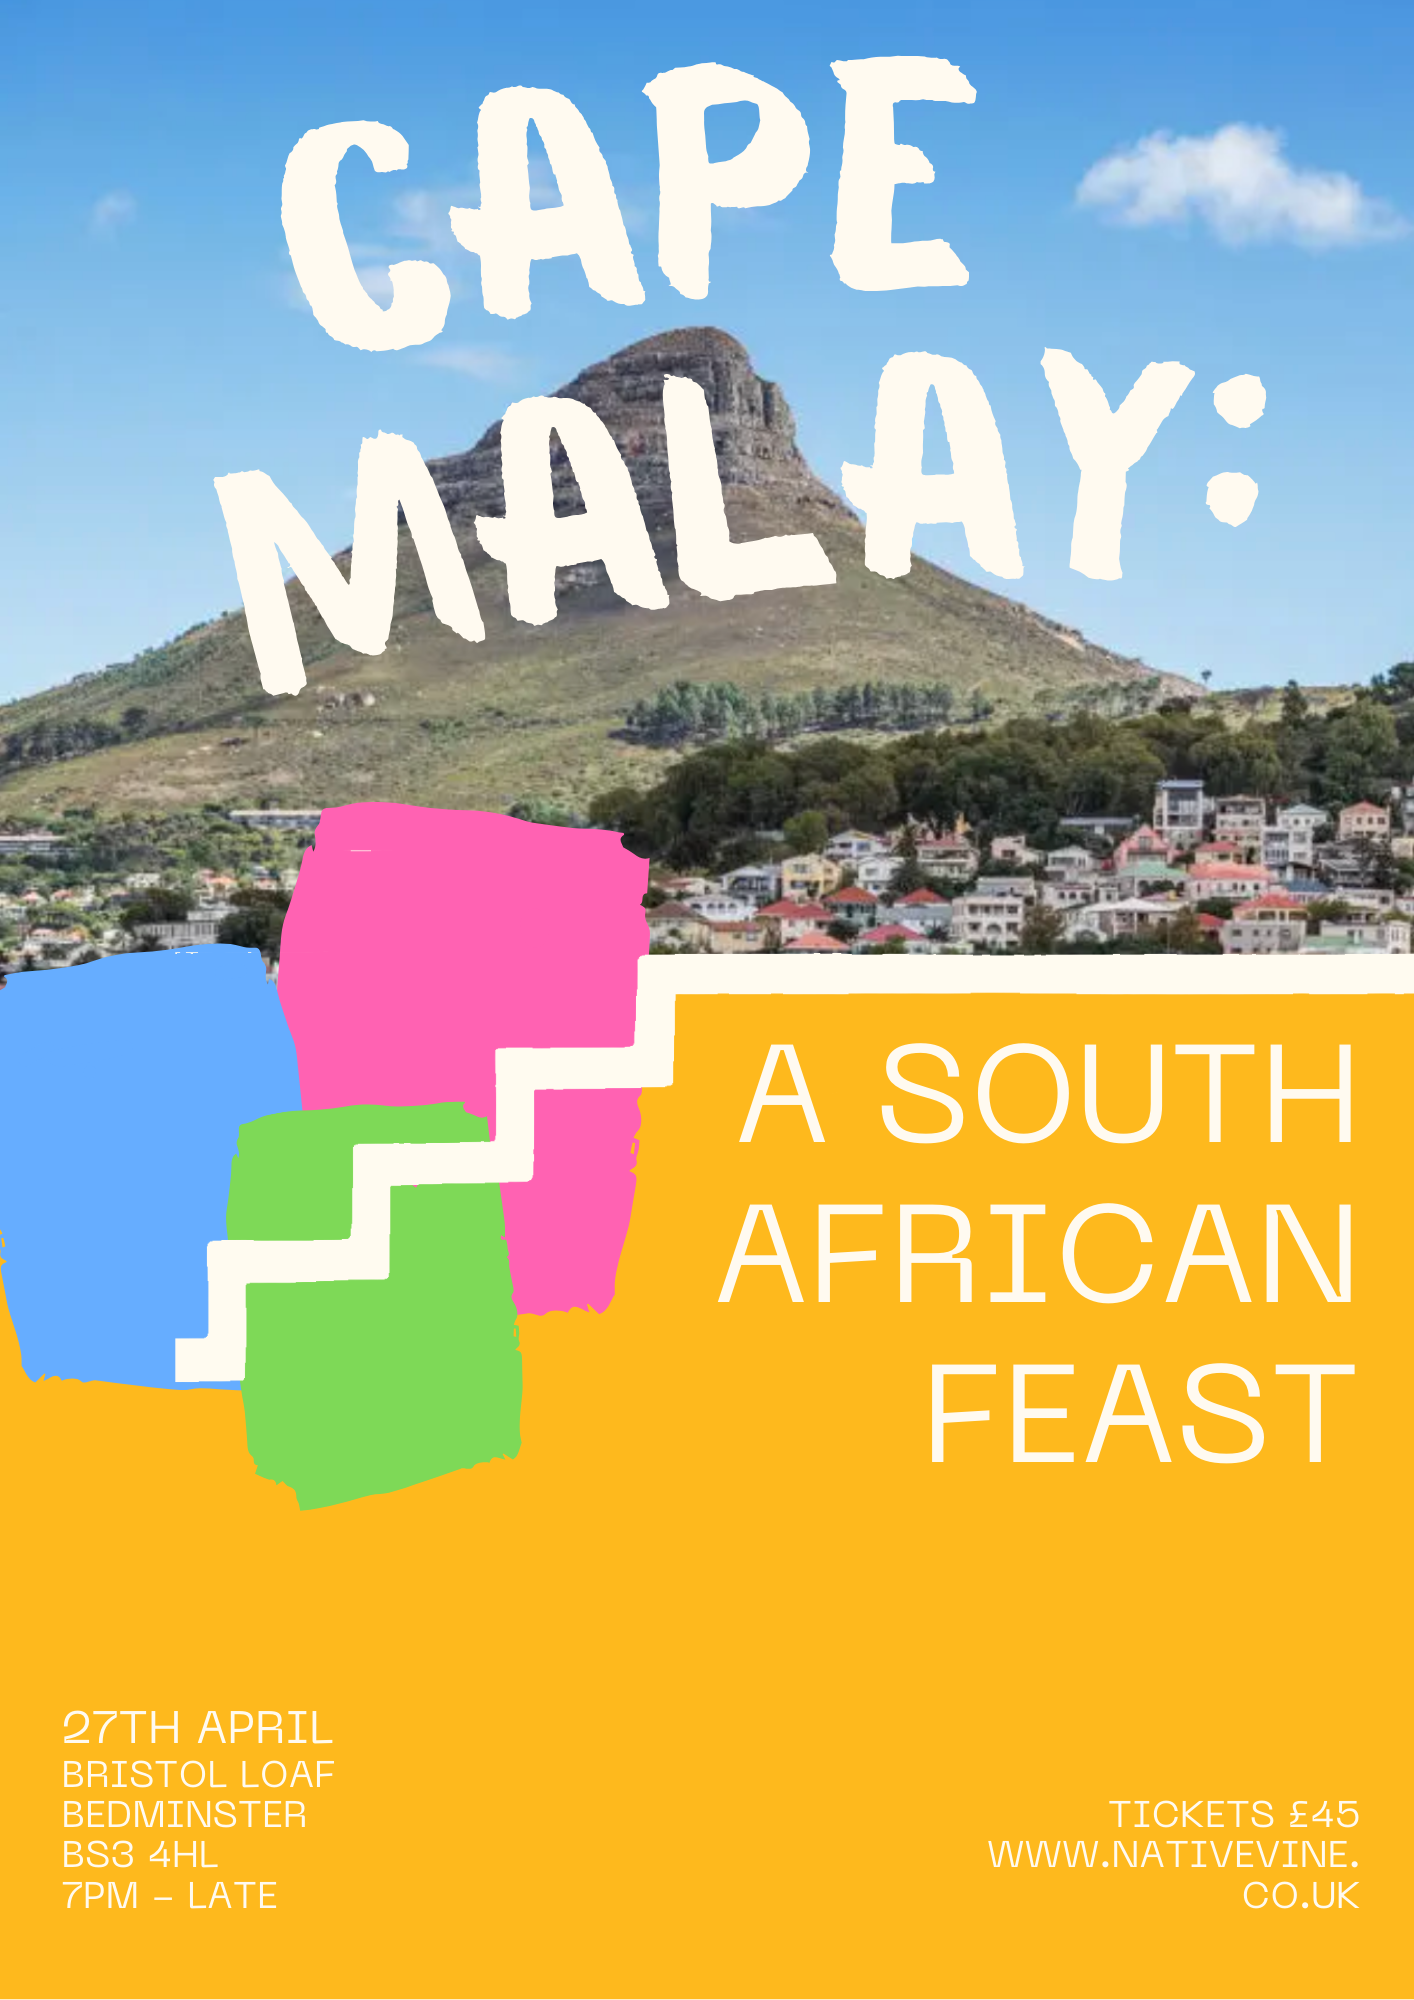 Cape Malay: A South African Feast